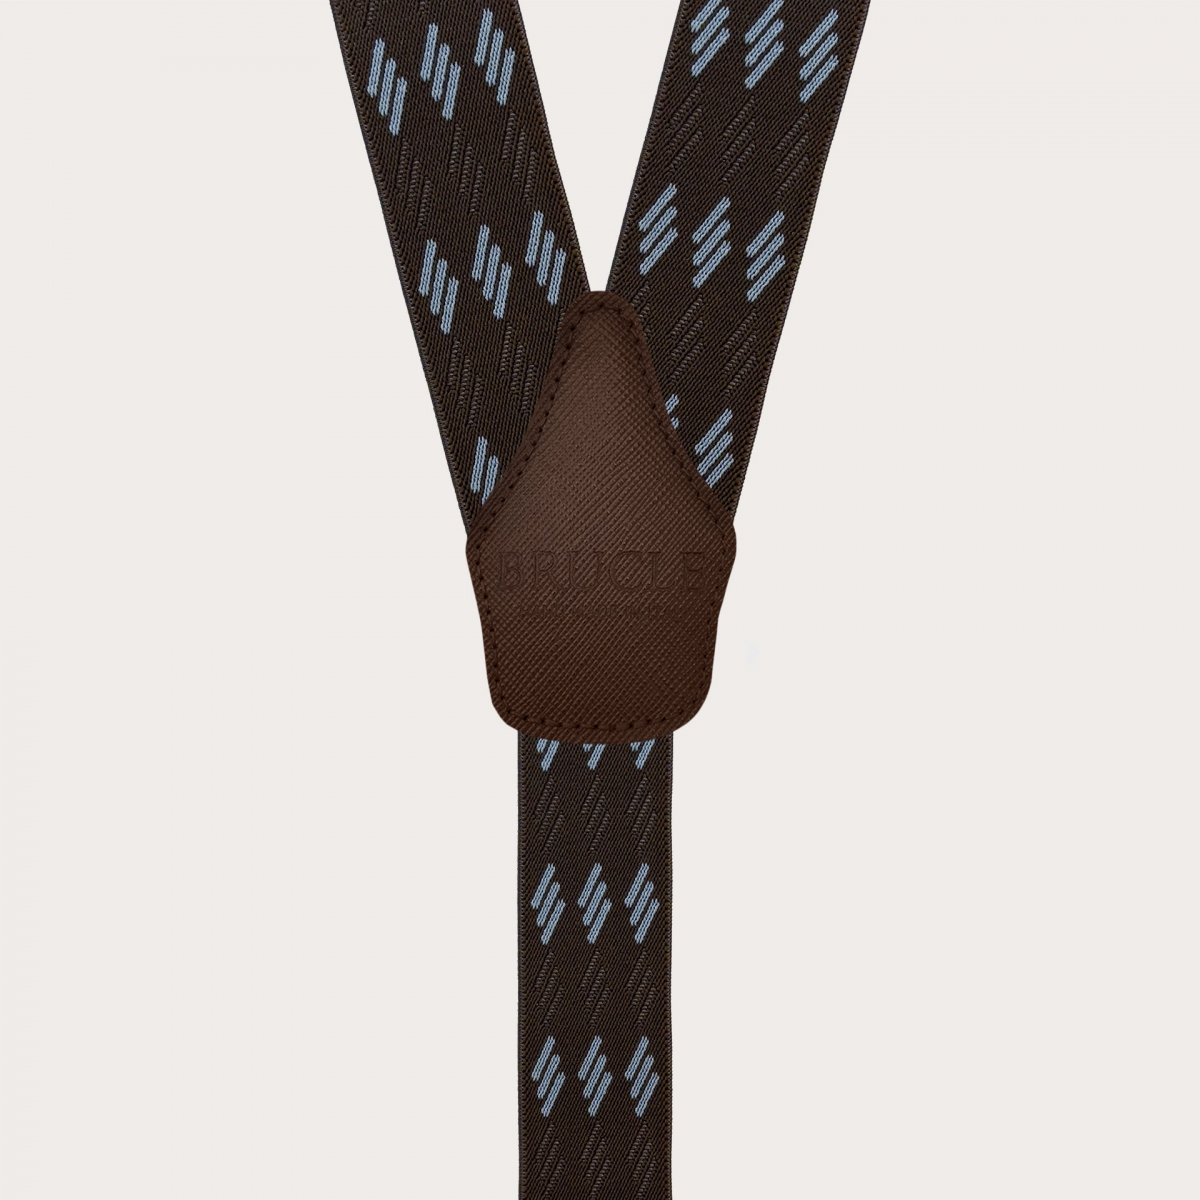 Brown elastic suspenders with blue stripes and clips